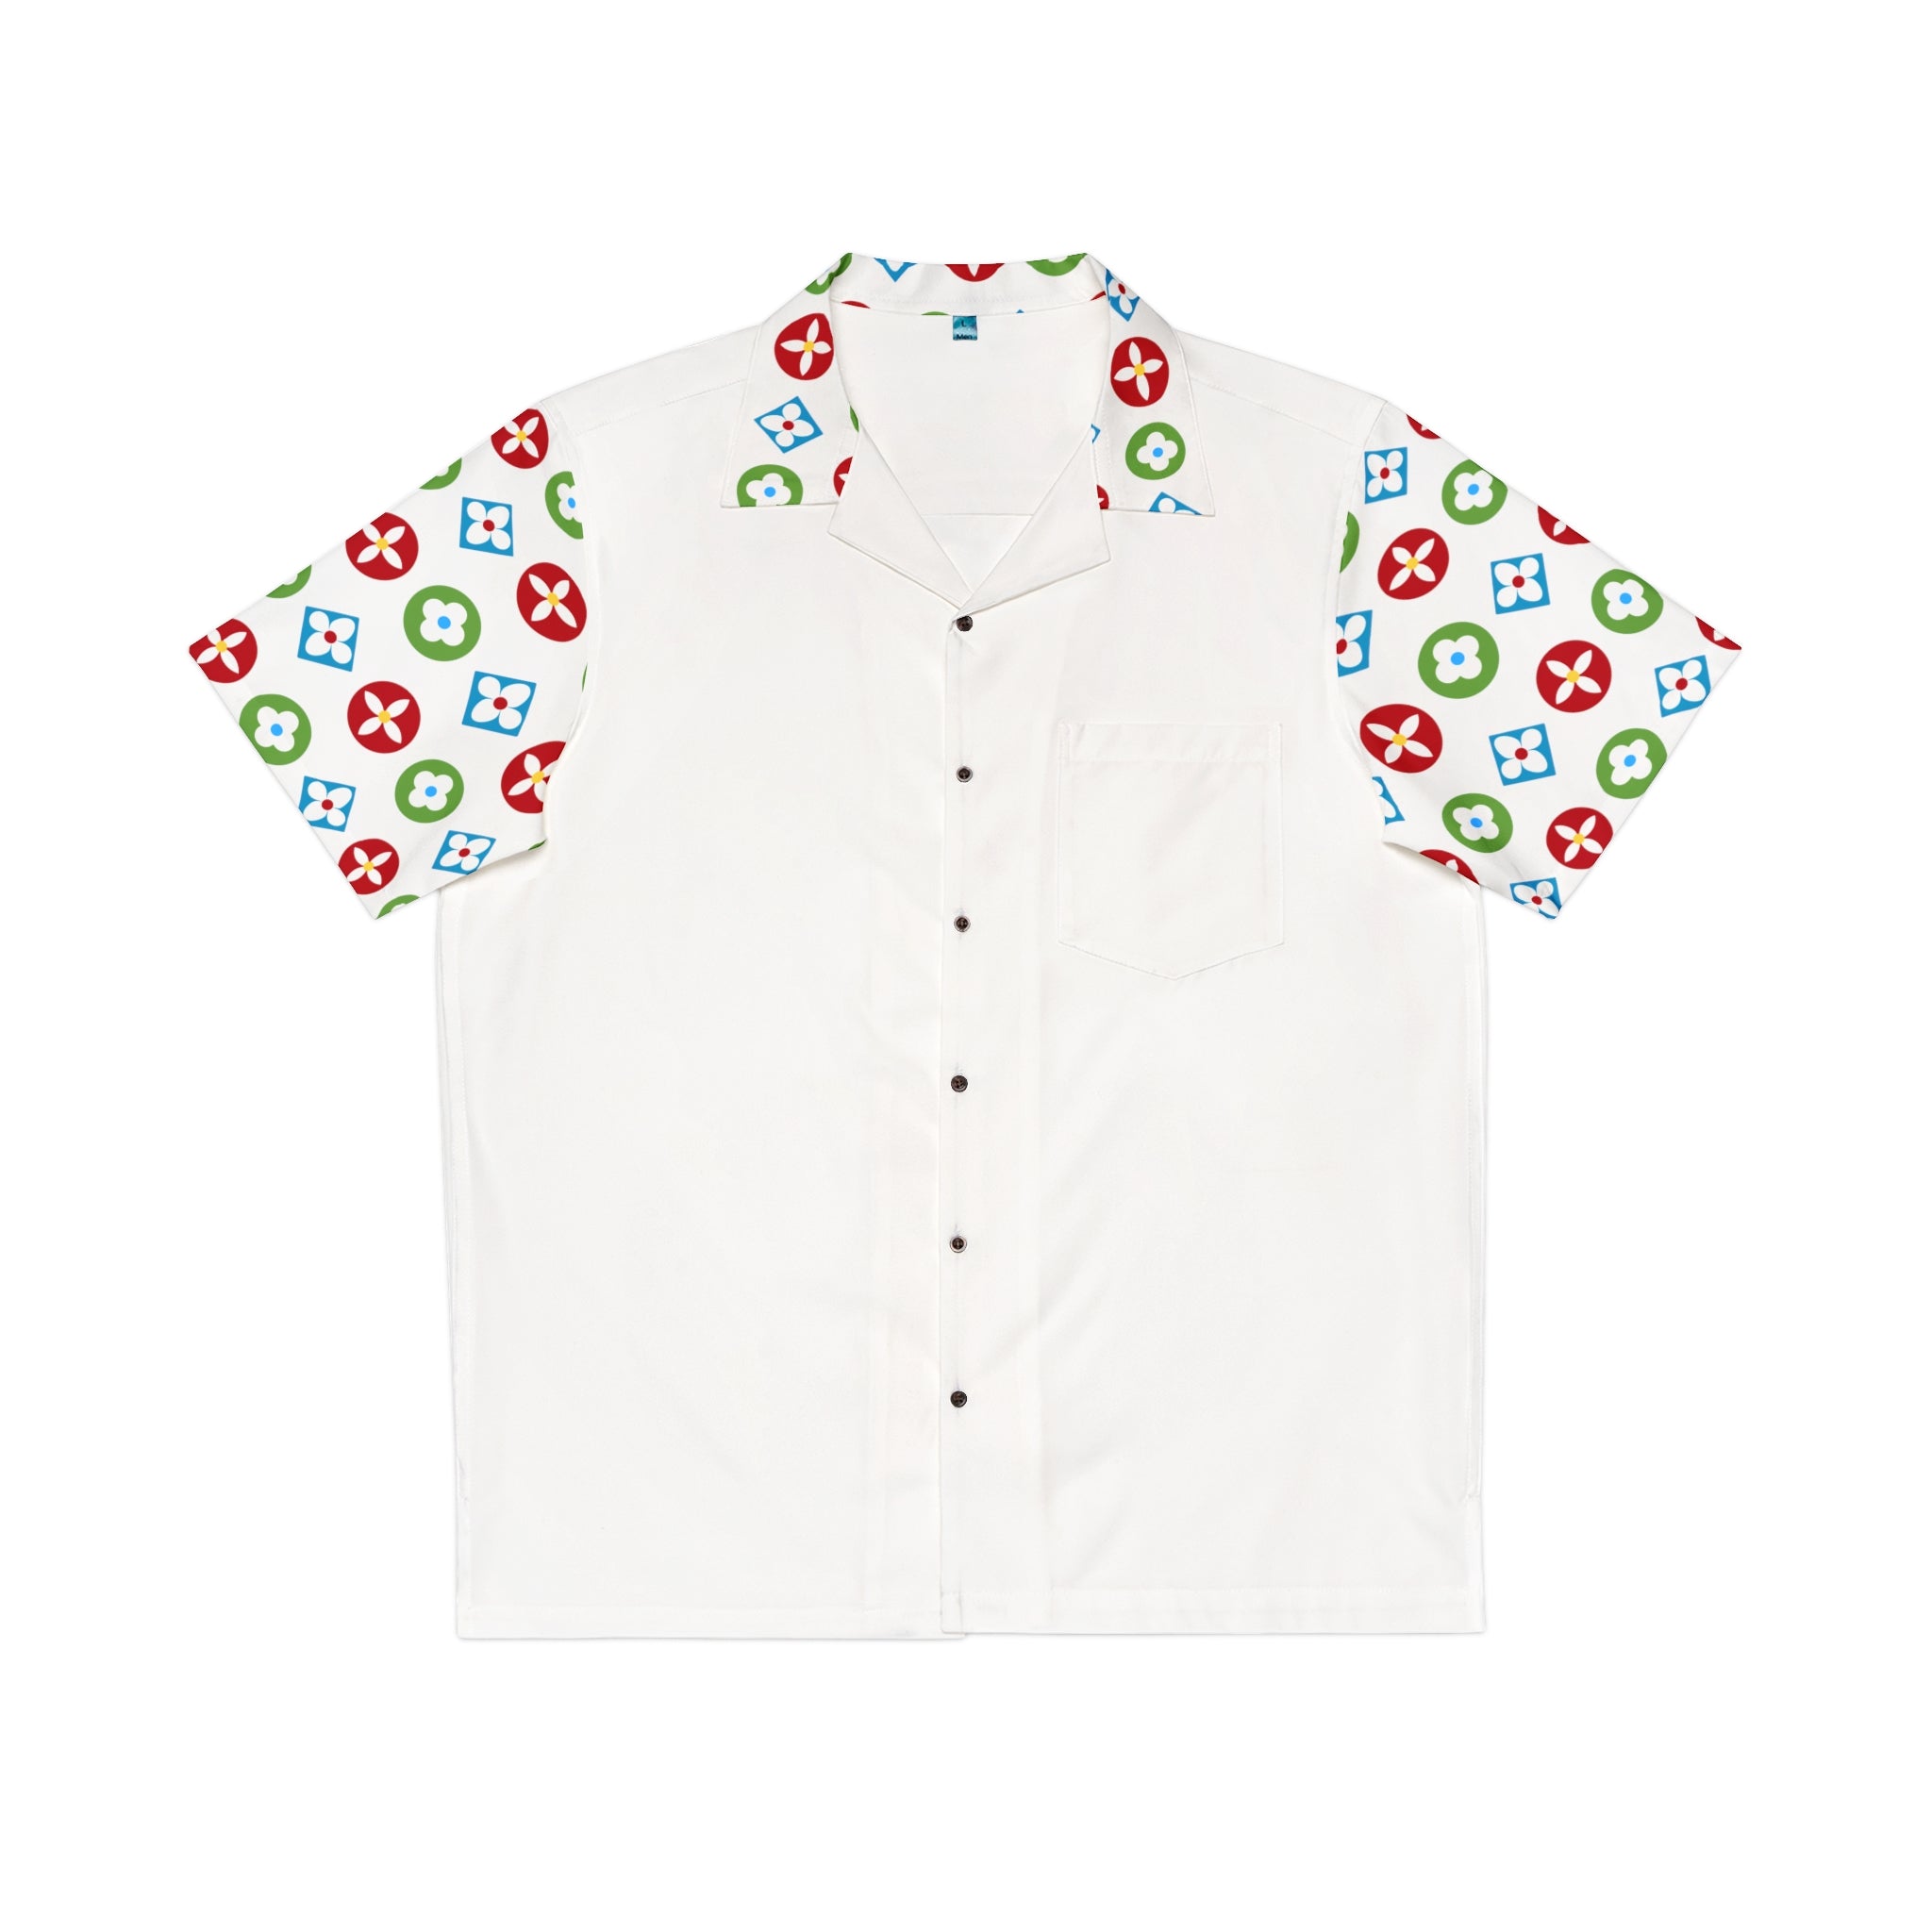  Groove Collection Trilogy of Icons Solid Block (Red, Green, Blue) White Unisex Gender Neutral Button Up Shirt, Hawaiian Shirt Men's Shirts5XLBlack